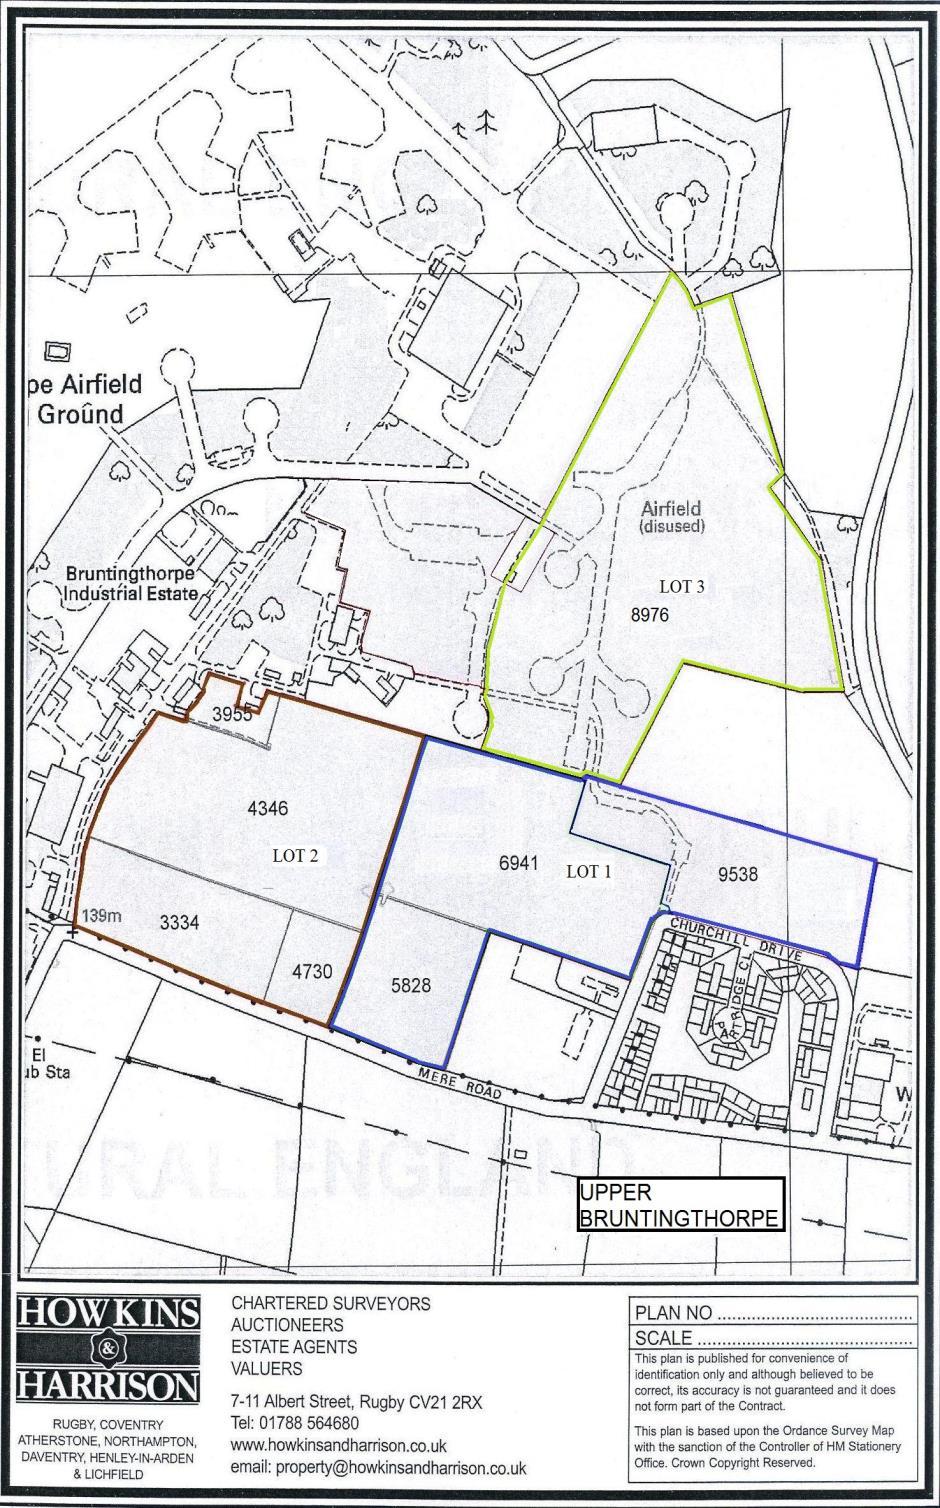 LEICESTERSHIRE REF. GK.47A LAND AT UPPER BRUNTINGTHORPE NEAR LUTTERWORTH MESSRS DRAKE & DEWES Sale of approximately 68 Acres of Grass 1 9538,6941,5828 23.37 9.46 2 3955,4346,3334,4730 22.00 8.